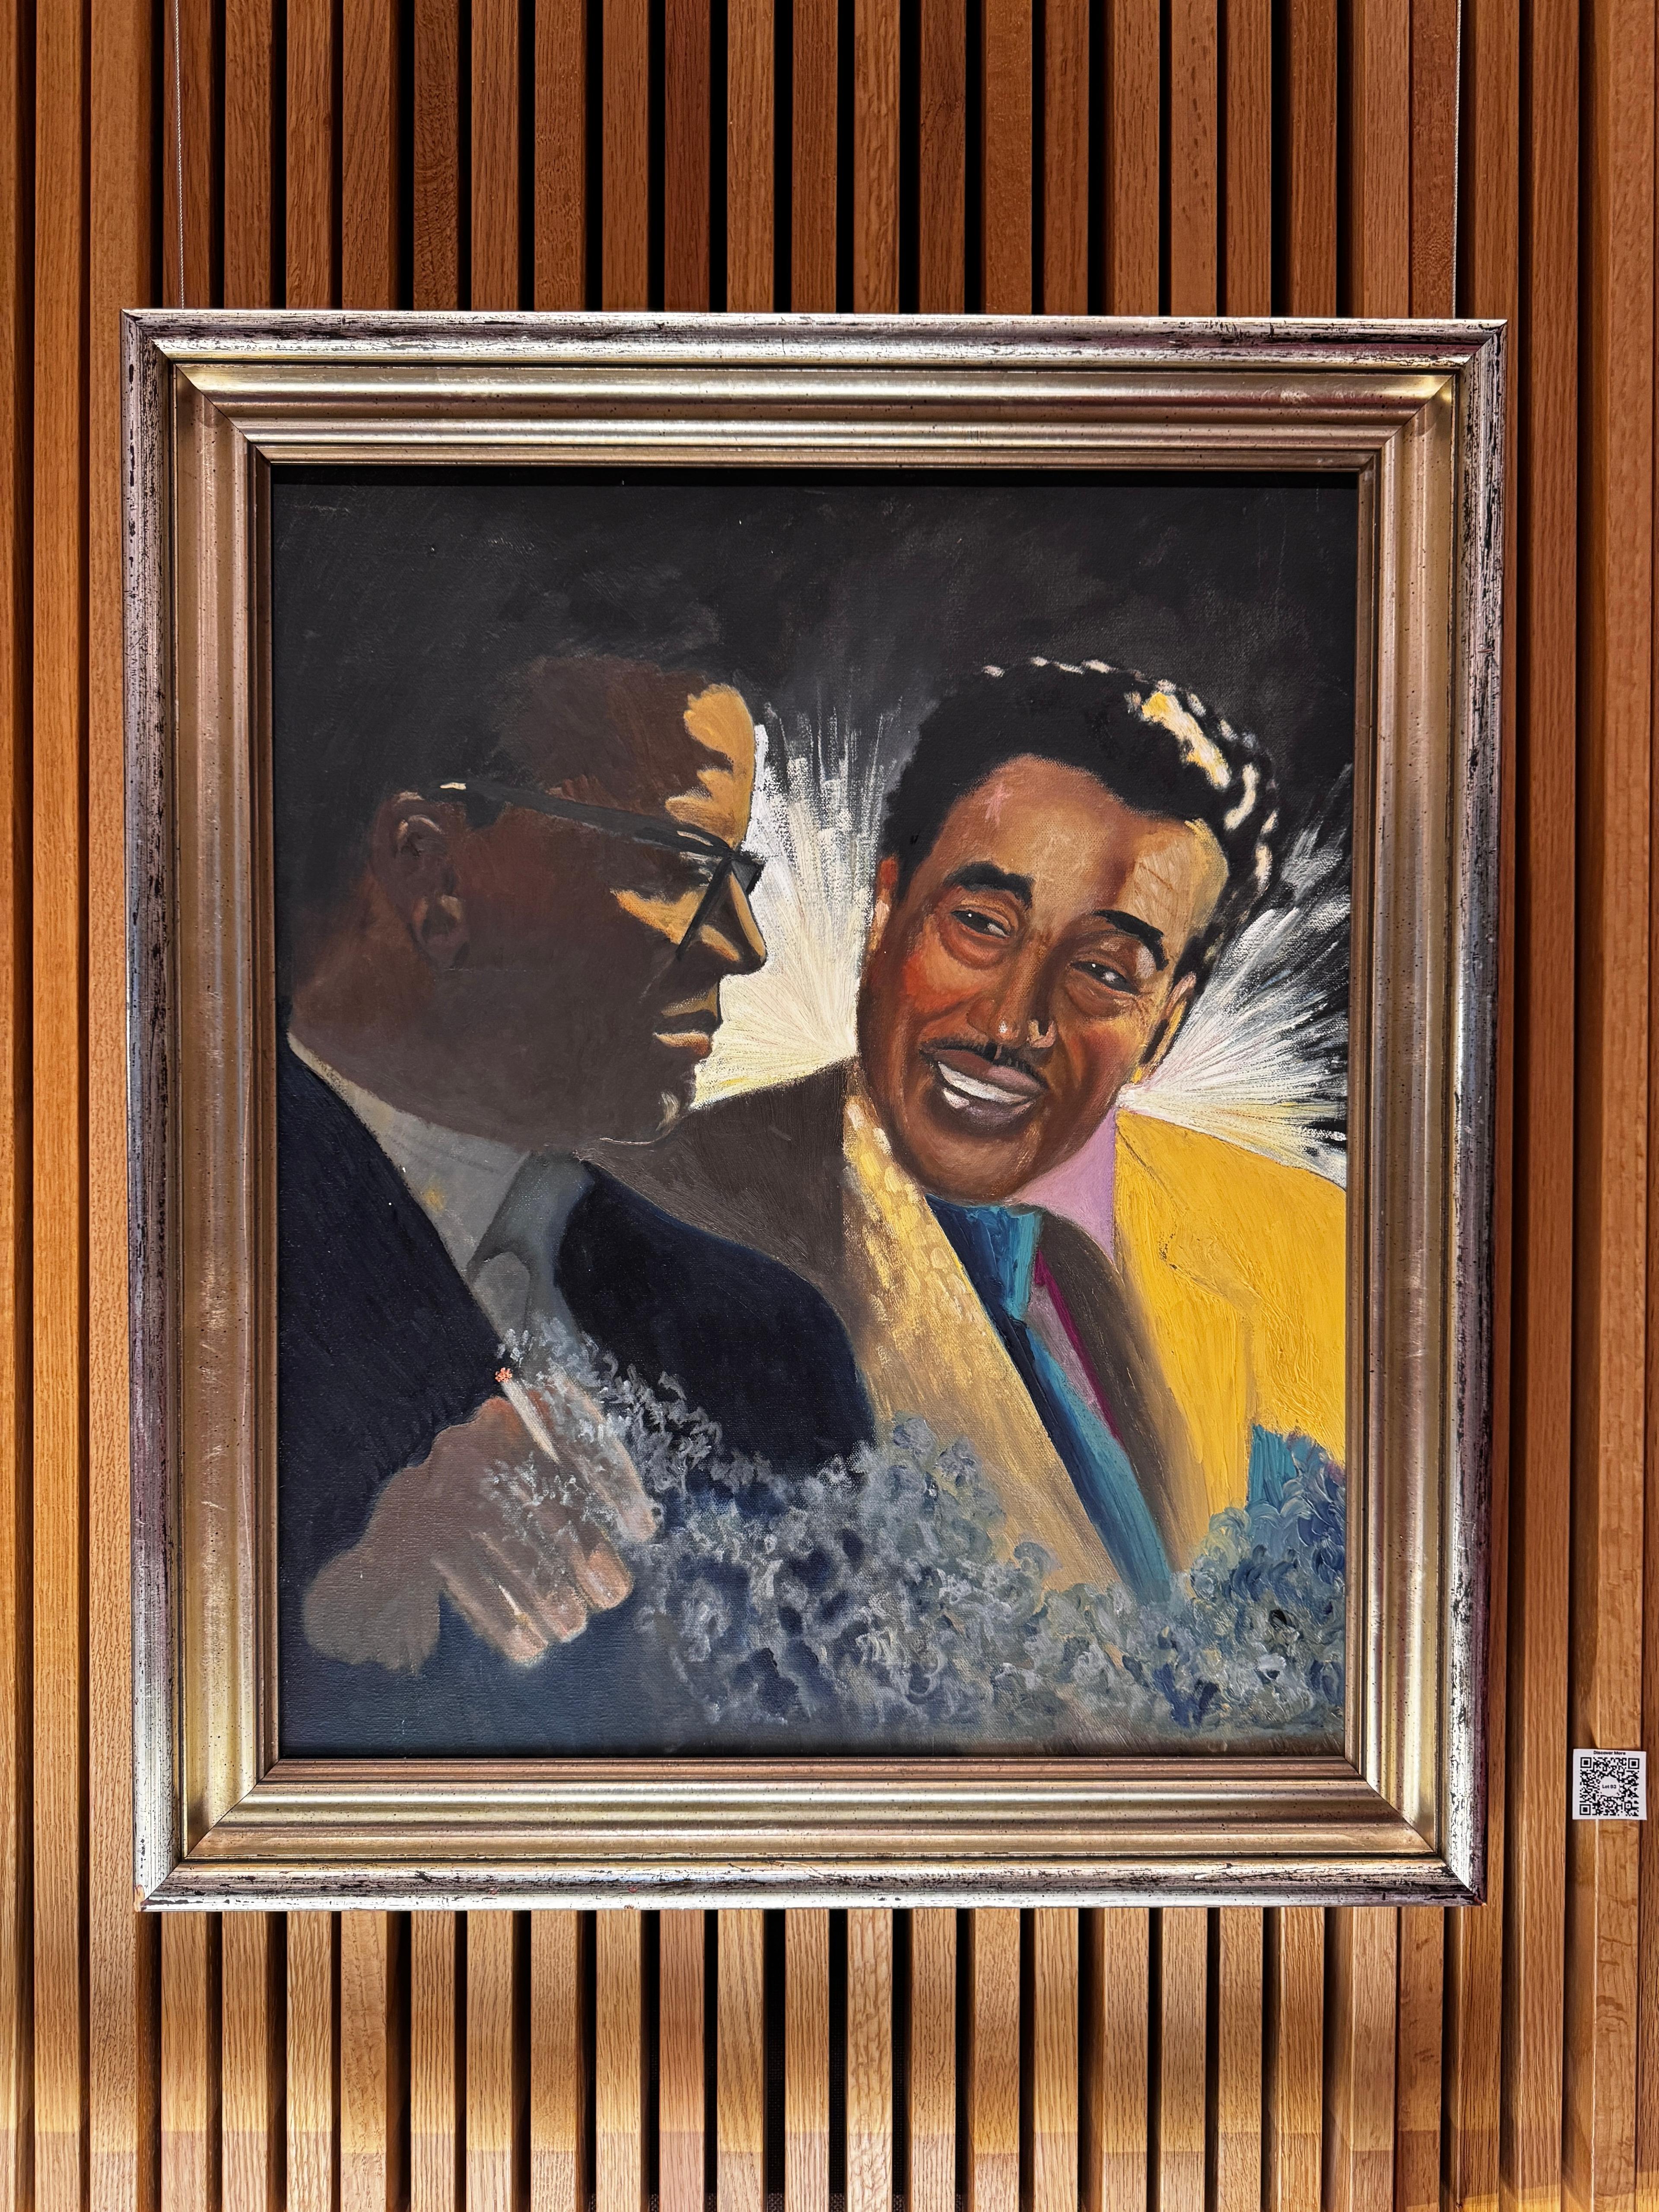 A framed painting of two men standing next to each other